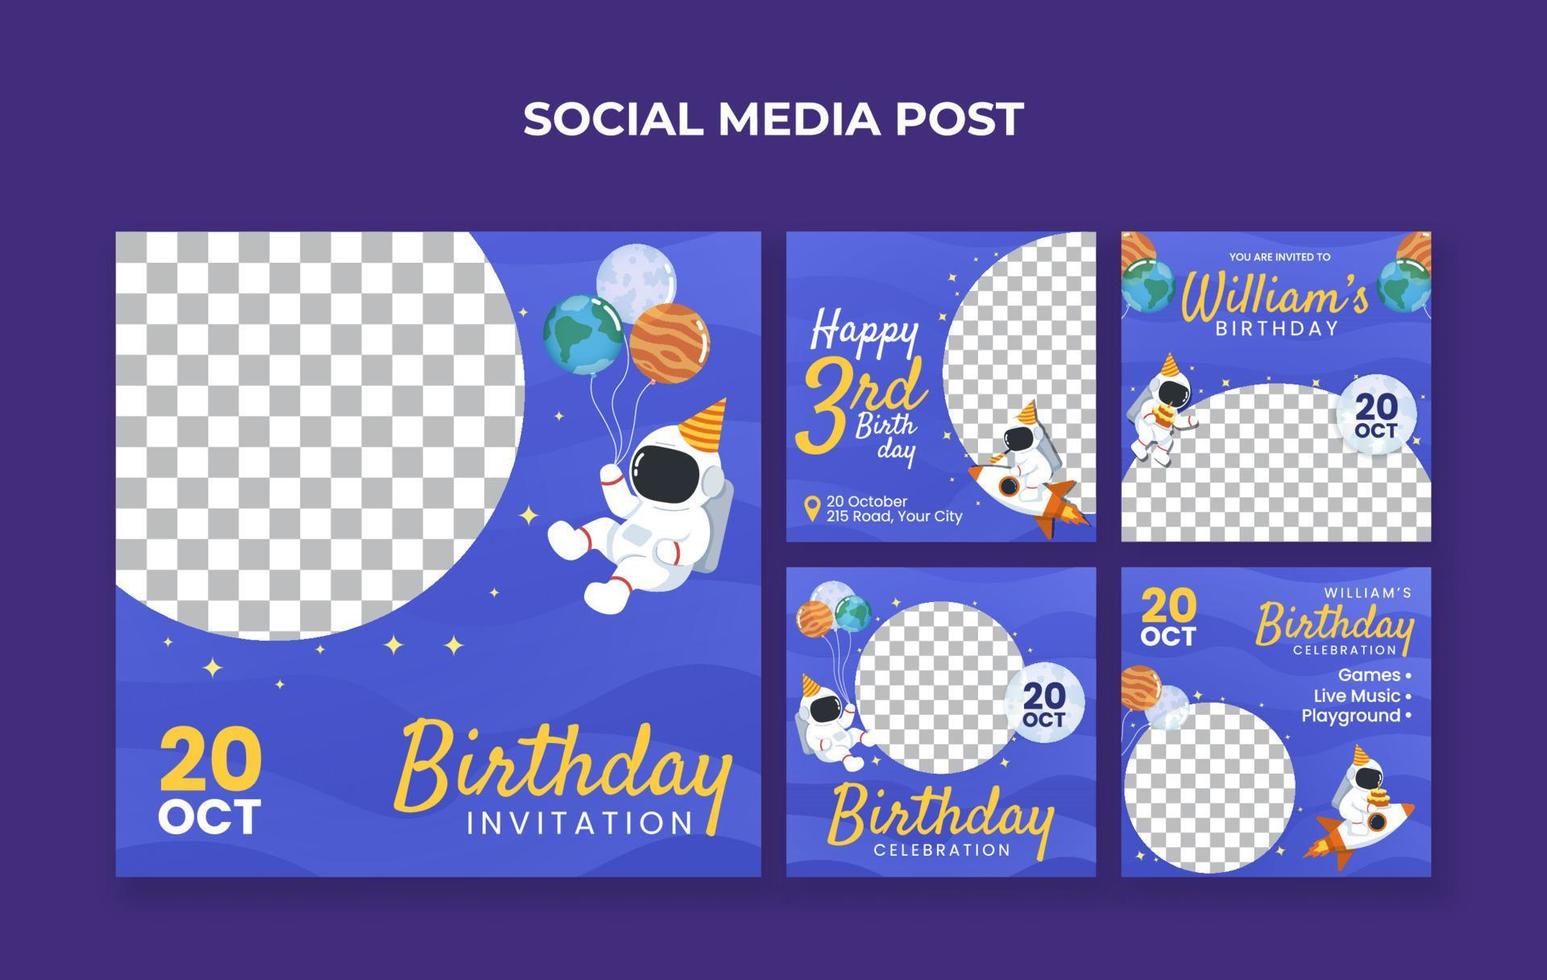 Birthday invitation social media post template with astronaut illustration. Suitable for kids birthday celebration or any other kids event vector